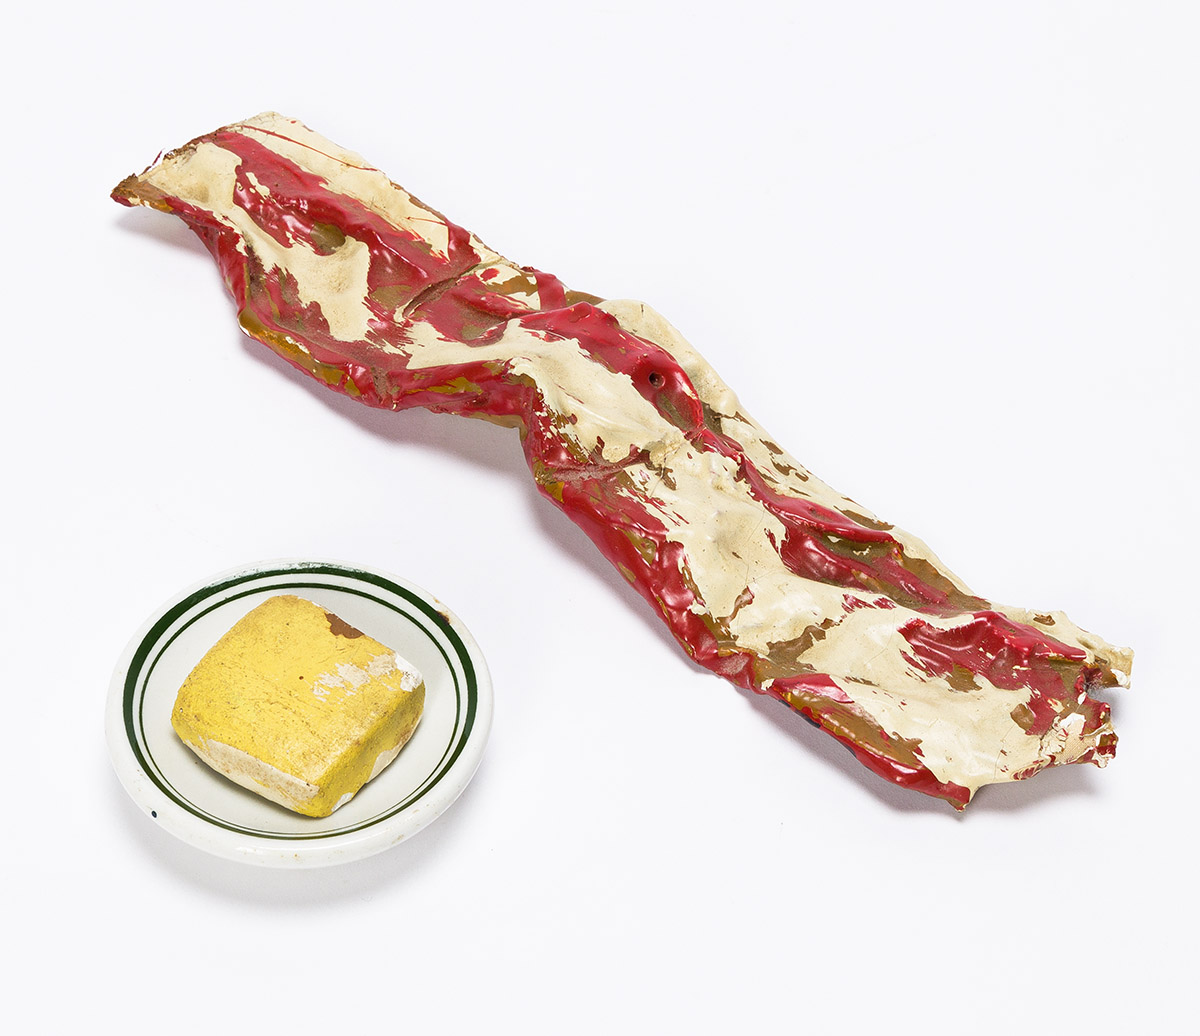 ELAINE STURTEVANT Oldenburg Store Objects, Bacon and Pat of Butter.